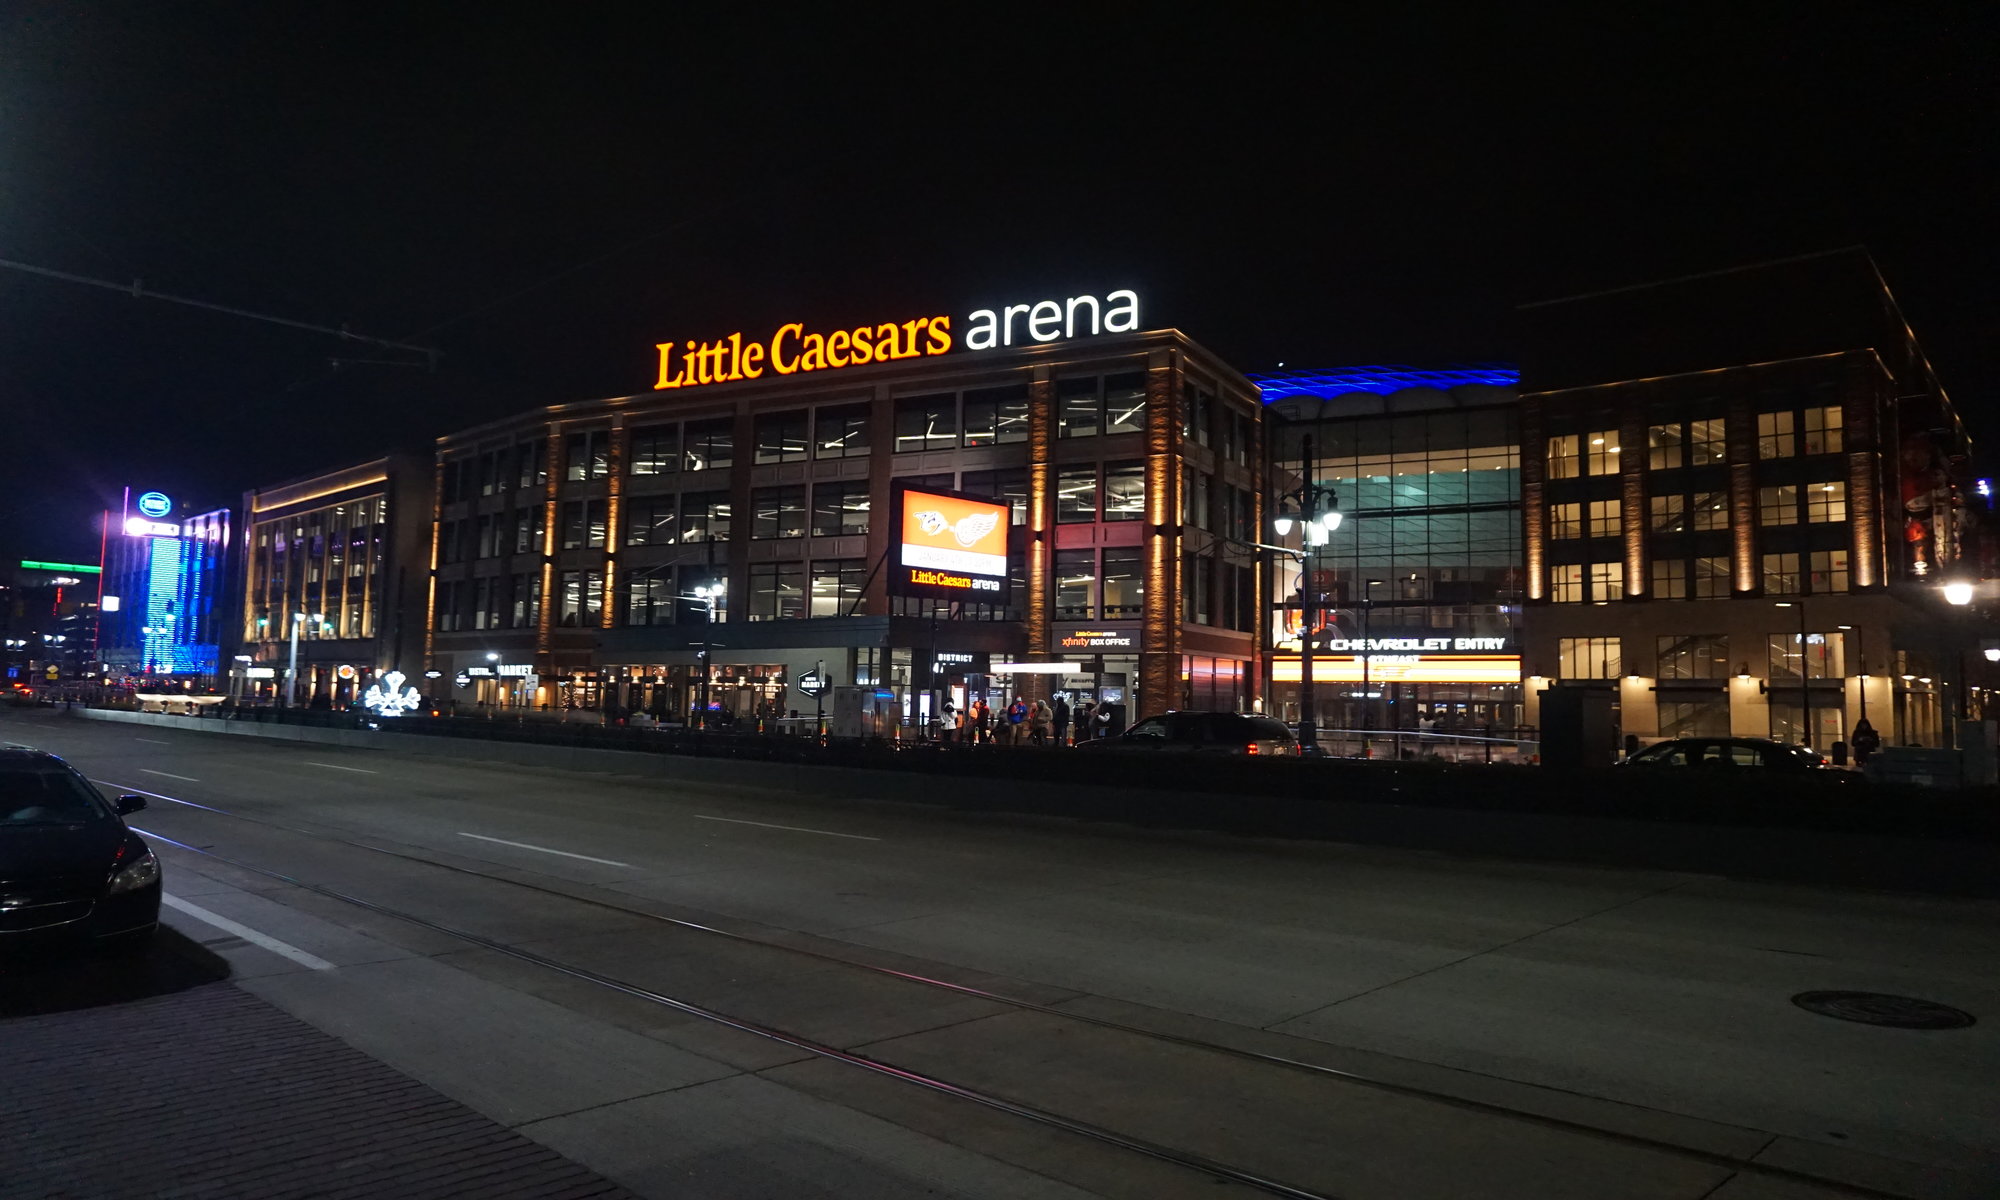 PHOTOS: Take a look inside Little Caesars Arena